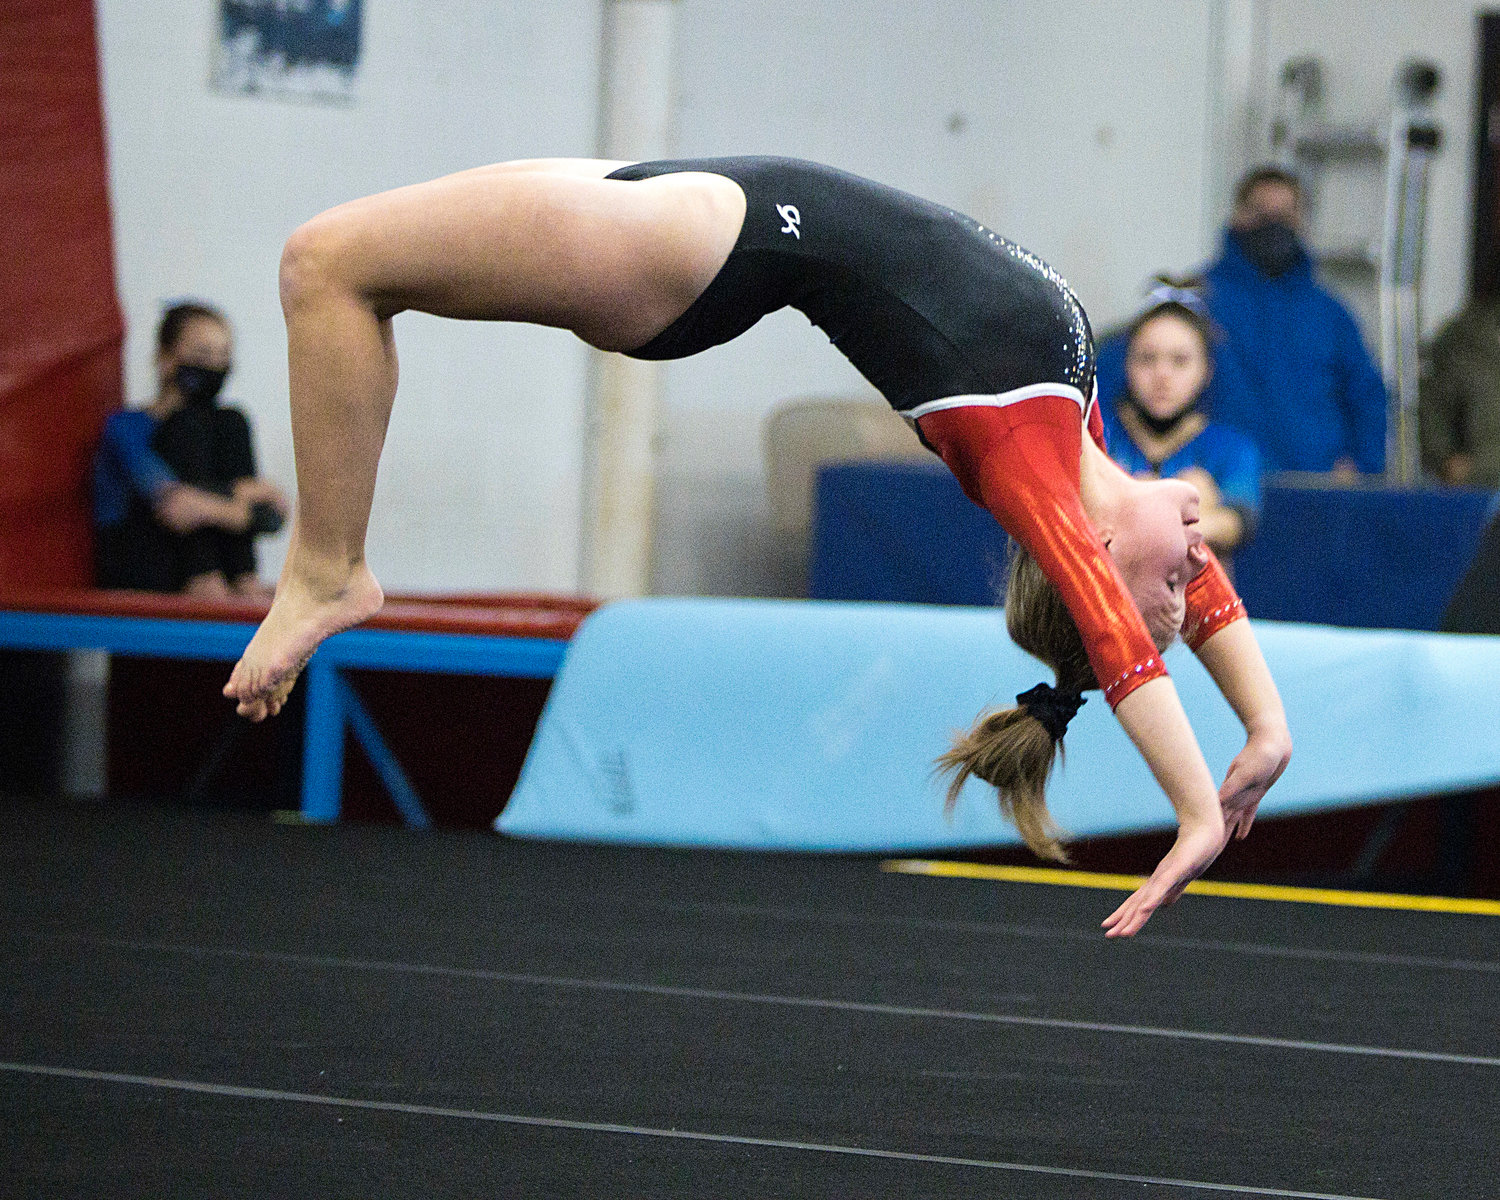 Brettyn-Olivia Newsome performs an exhibition routine on floor.